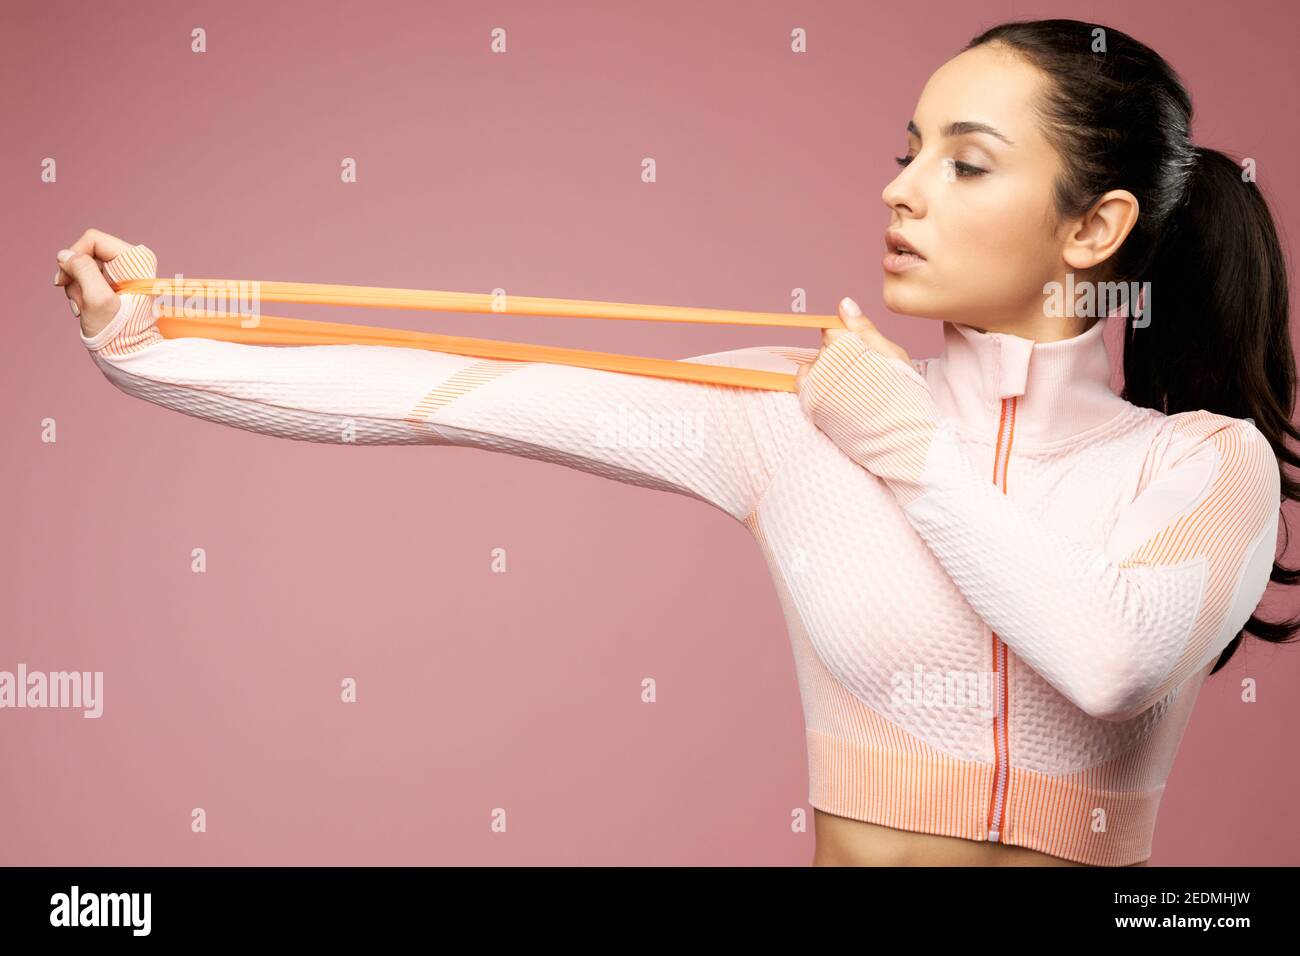 Attractive sporty lady doing exercise with elastic resistance band. Isolated on pink background Stock Photo